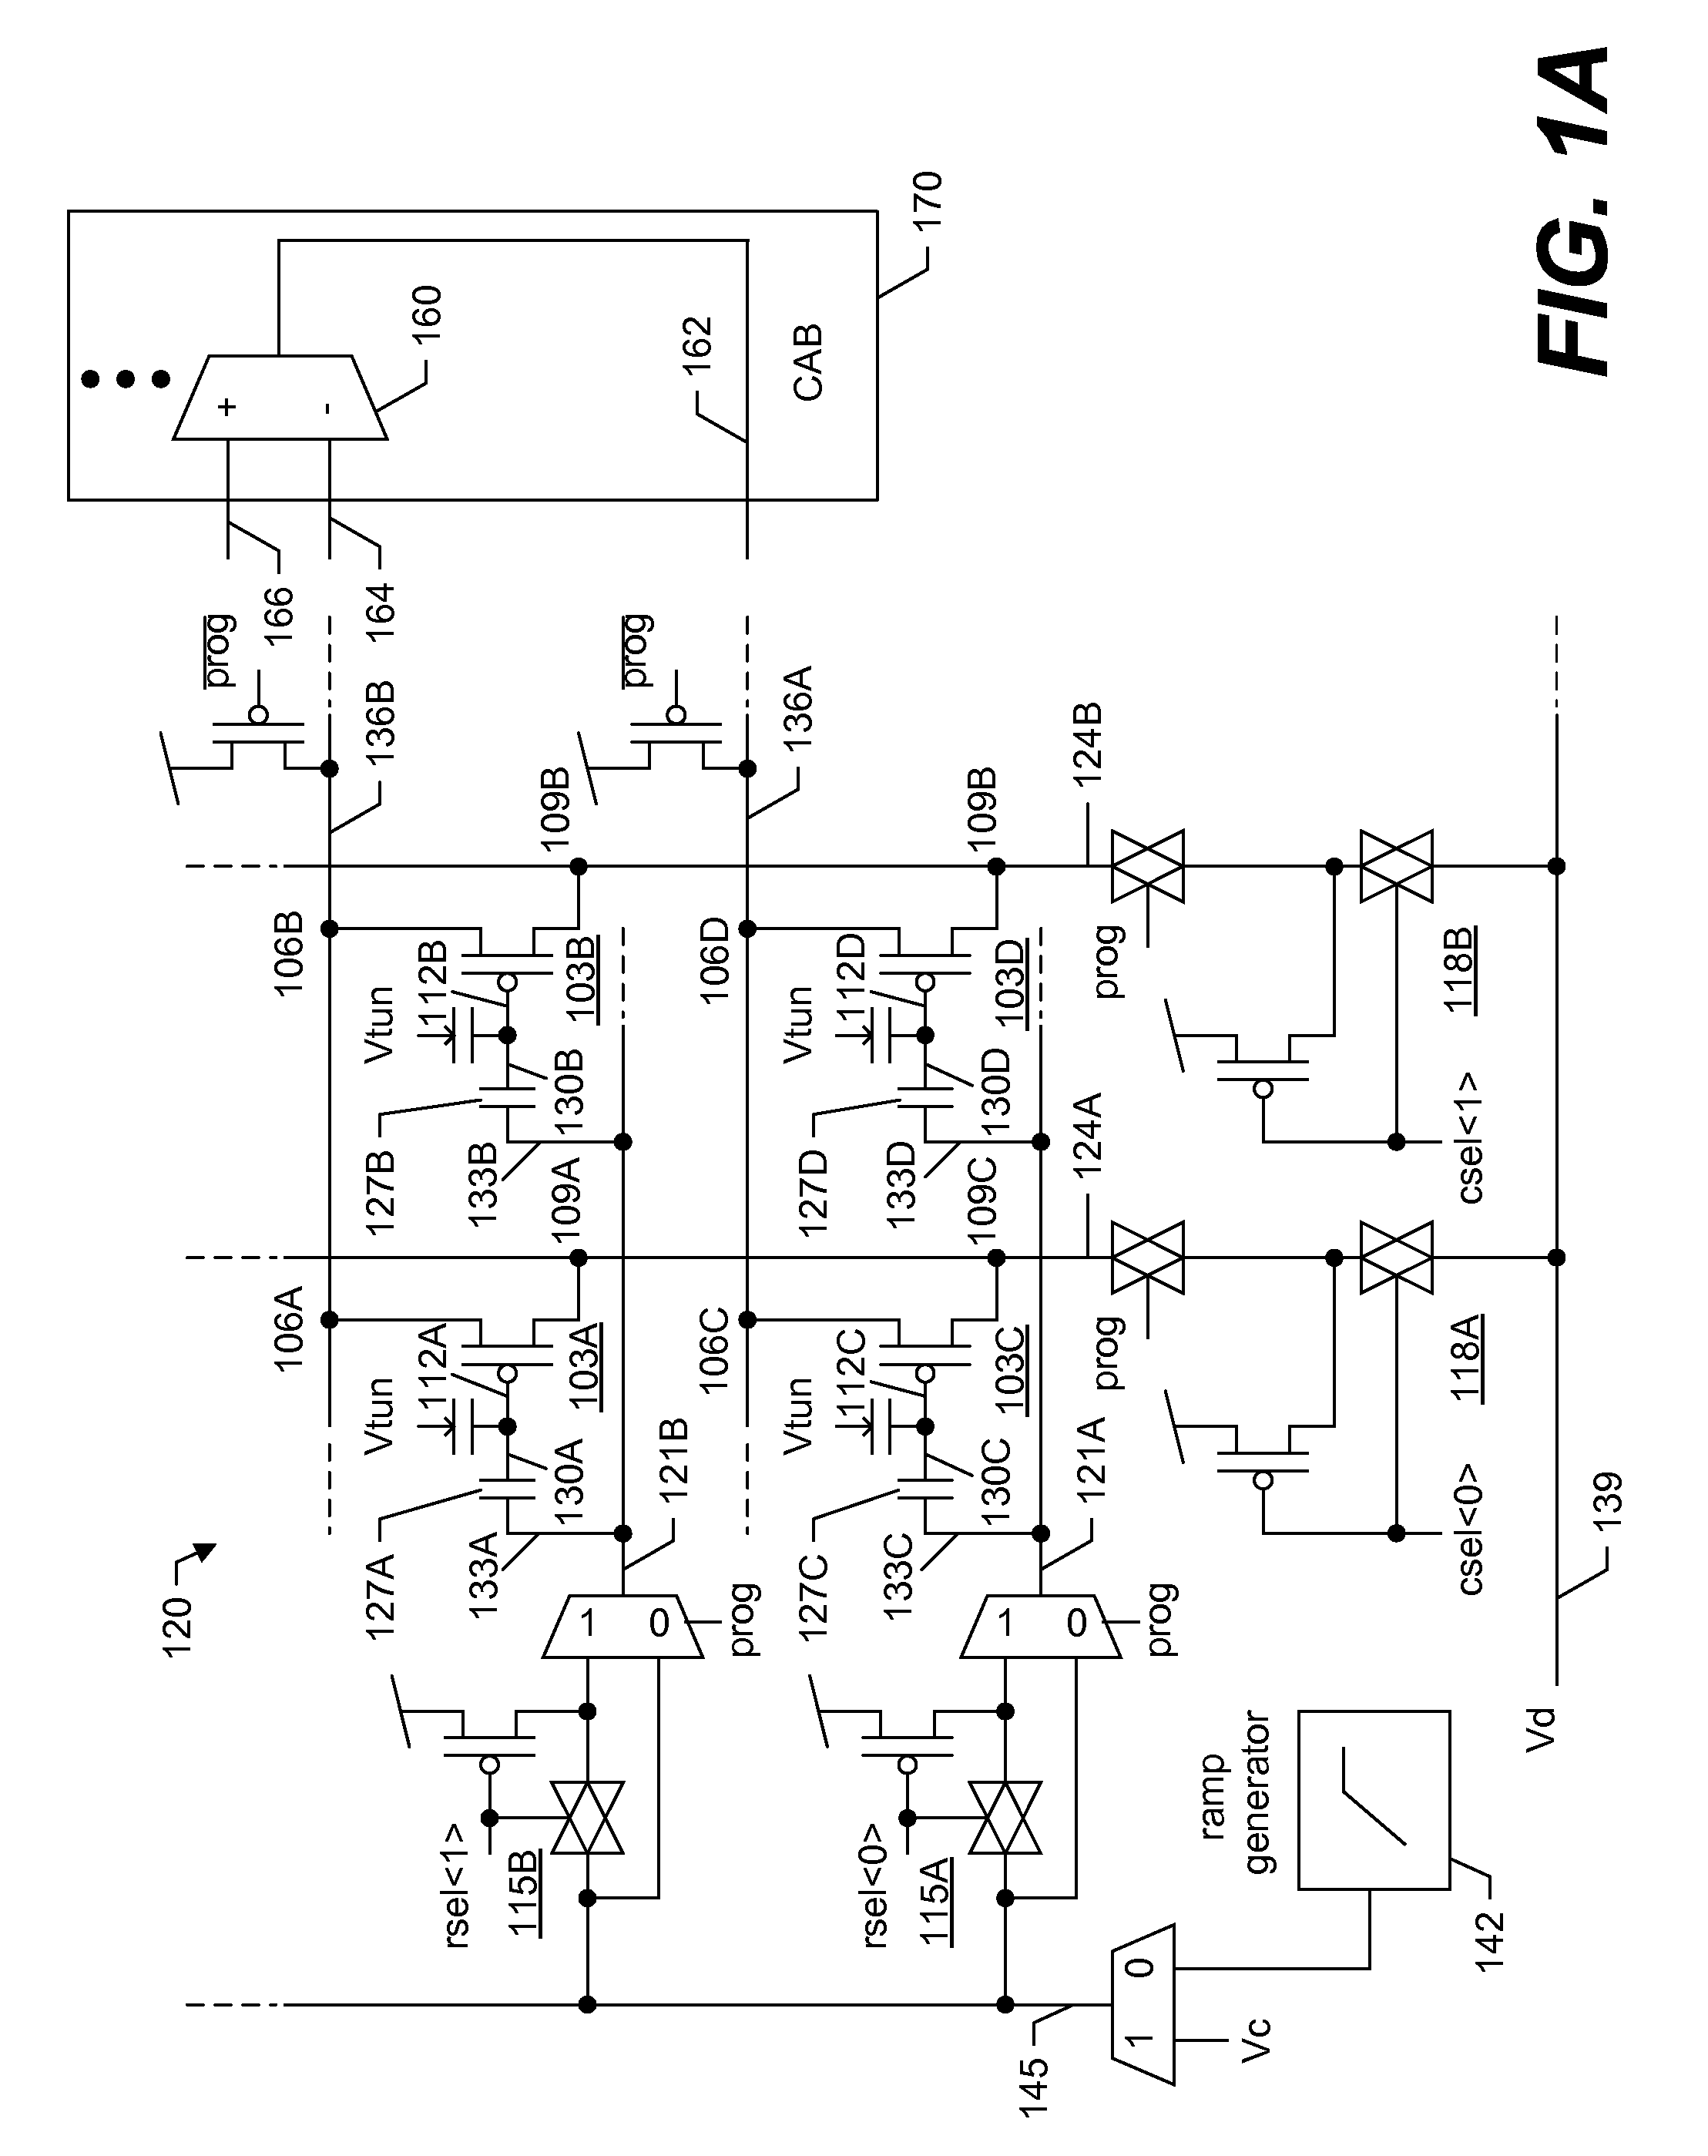 Systems and methods for programming large-scale field-programmable analog arrays